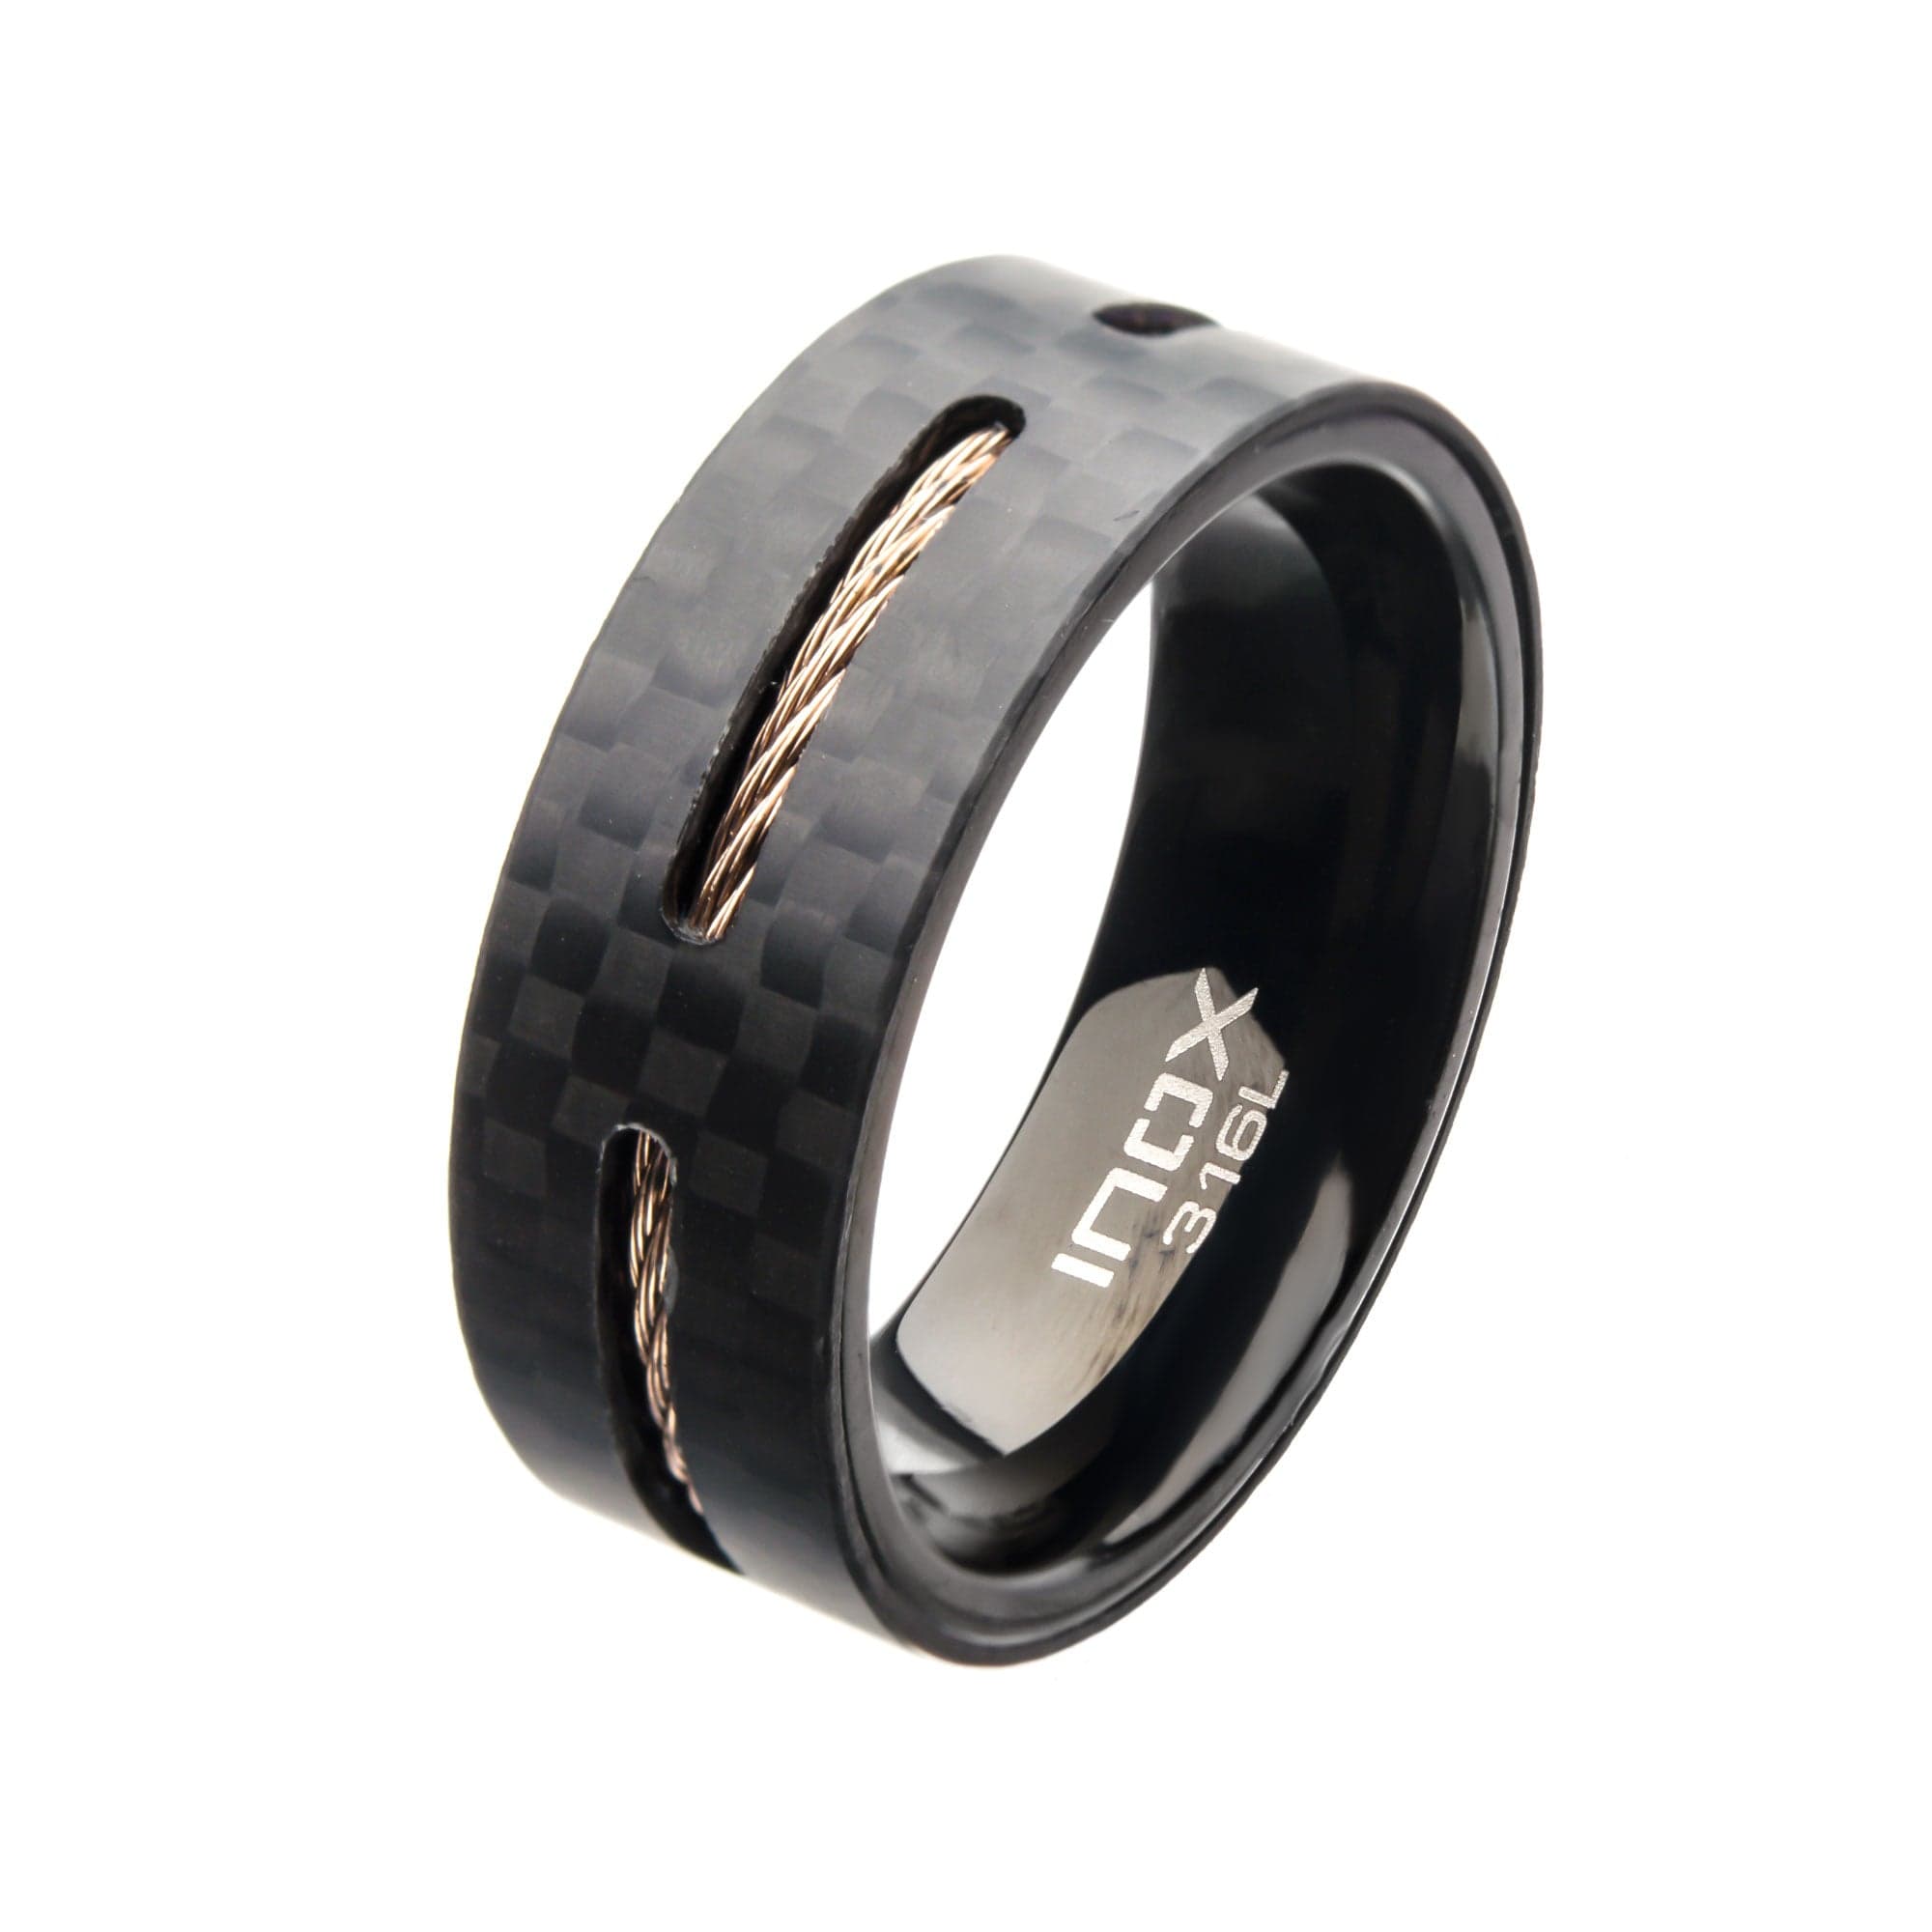 INOX JEWELRY Rings Black Stainless Steel Solid Carbon Fiber and Brown Cable Inlaid Band Ring